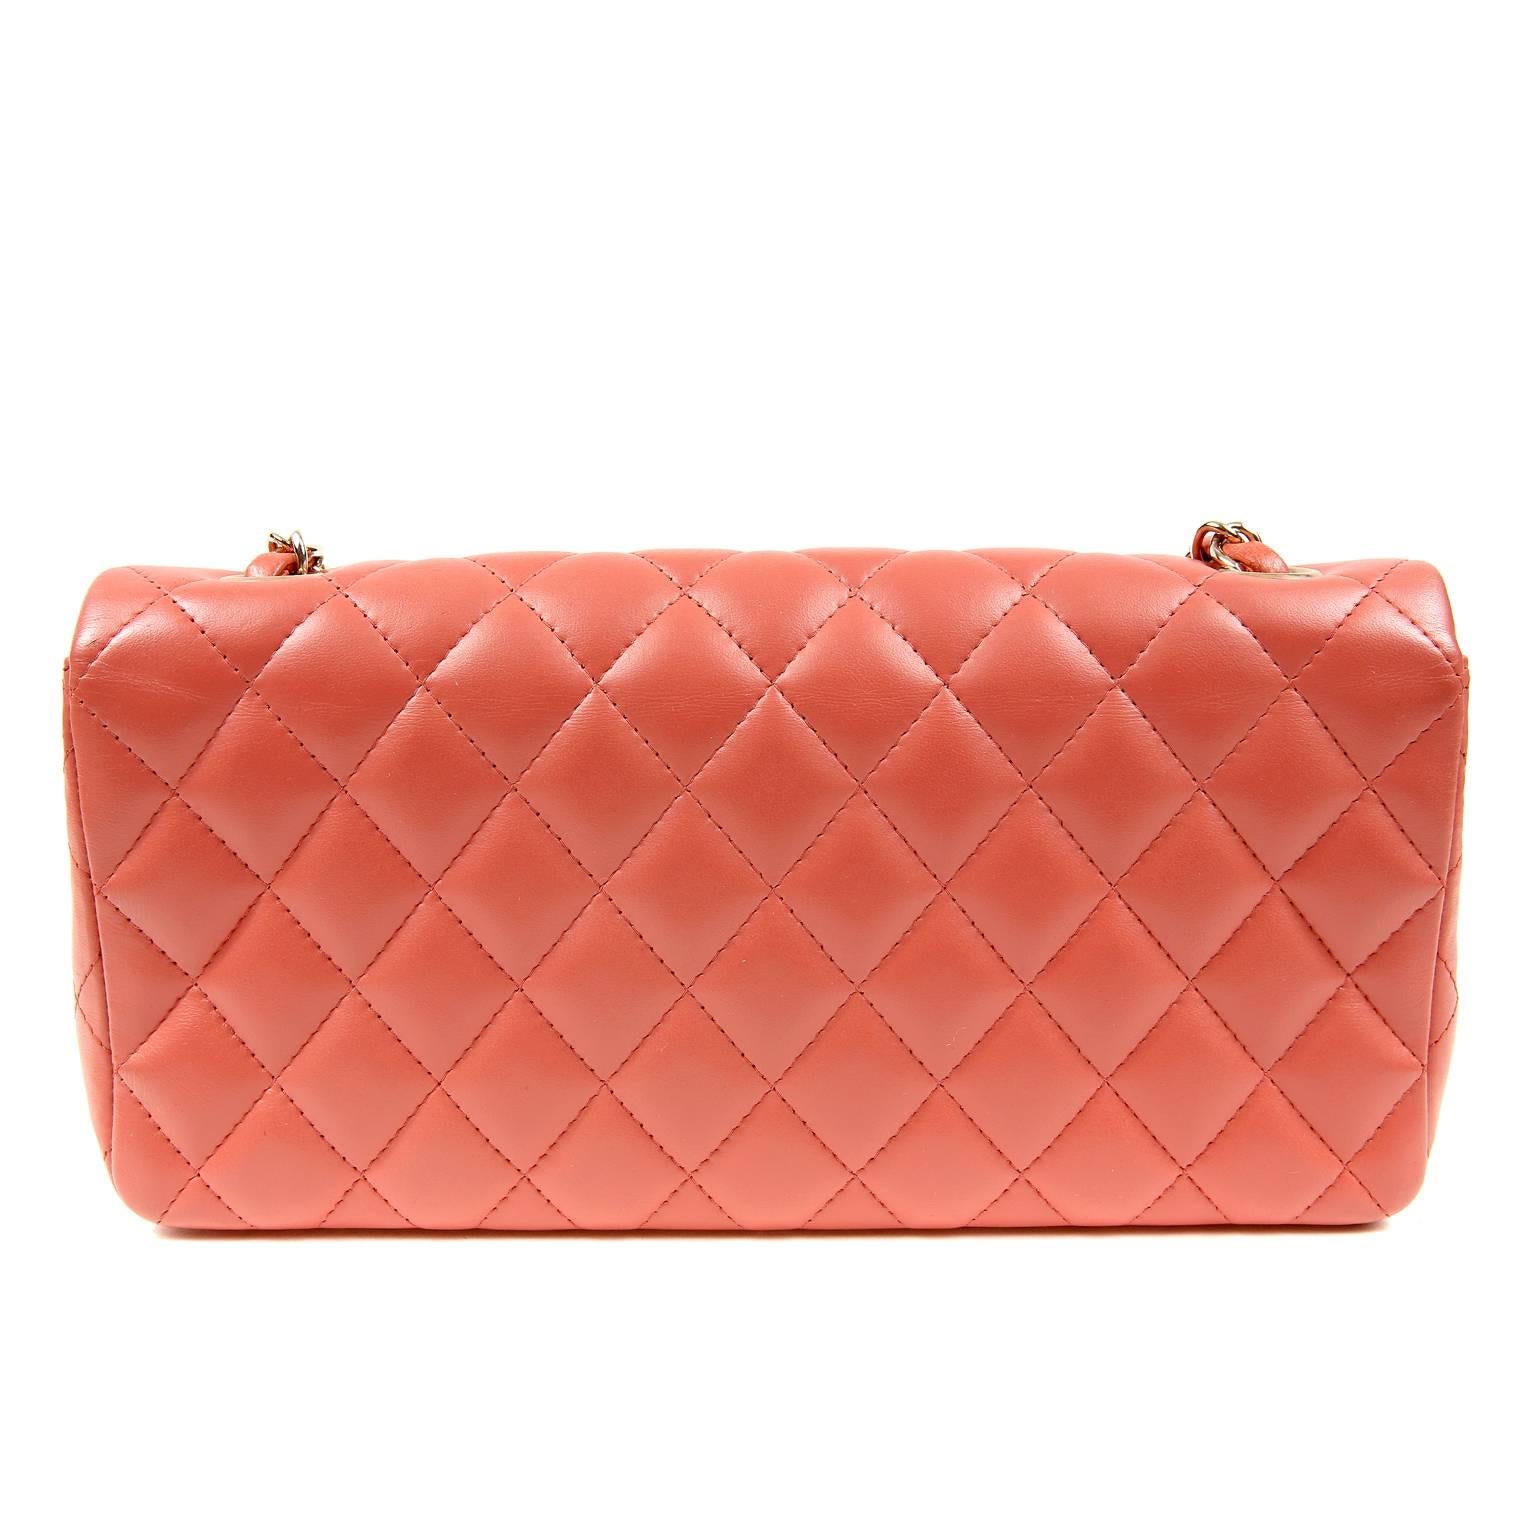 Chanel Salmon Lambskin East West Flap Bag- PRISTINE
 The captivating color and medium silhouette makes this Chanel a great addition to any collection. 

Corally salmon lambskin is quilted in signature Chanel diamond pattern.  Gold interlocking CC